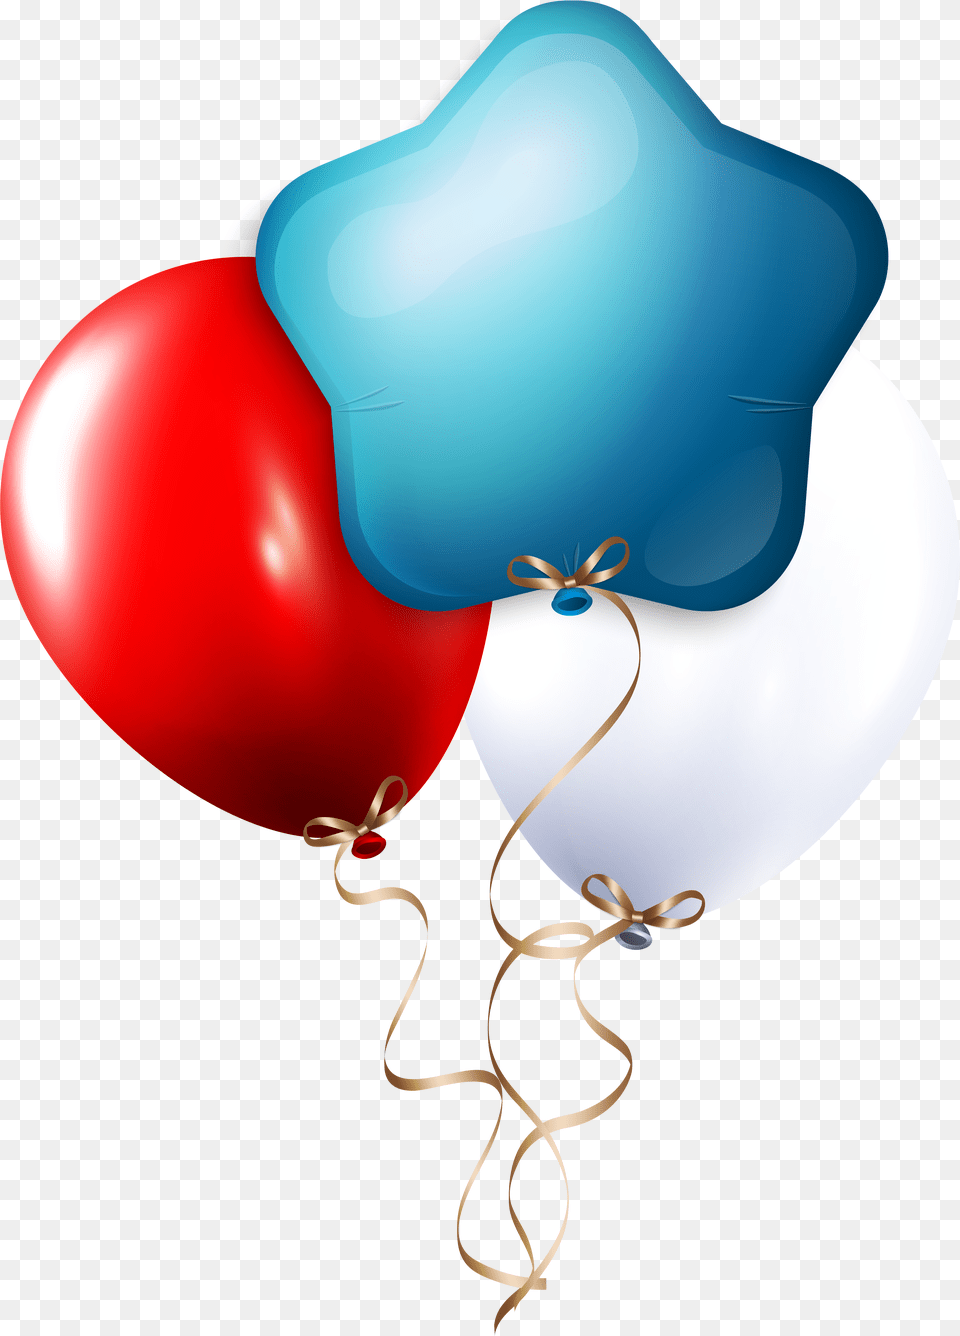 Transparent Balloons Clipart Balloon Red Blue Png Image